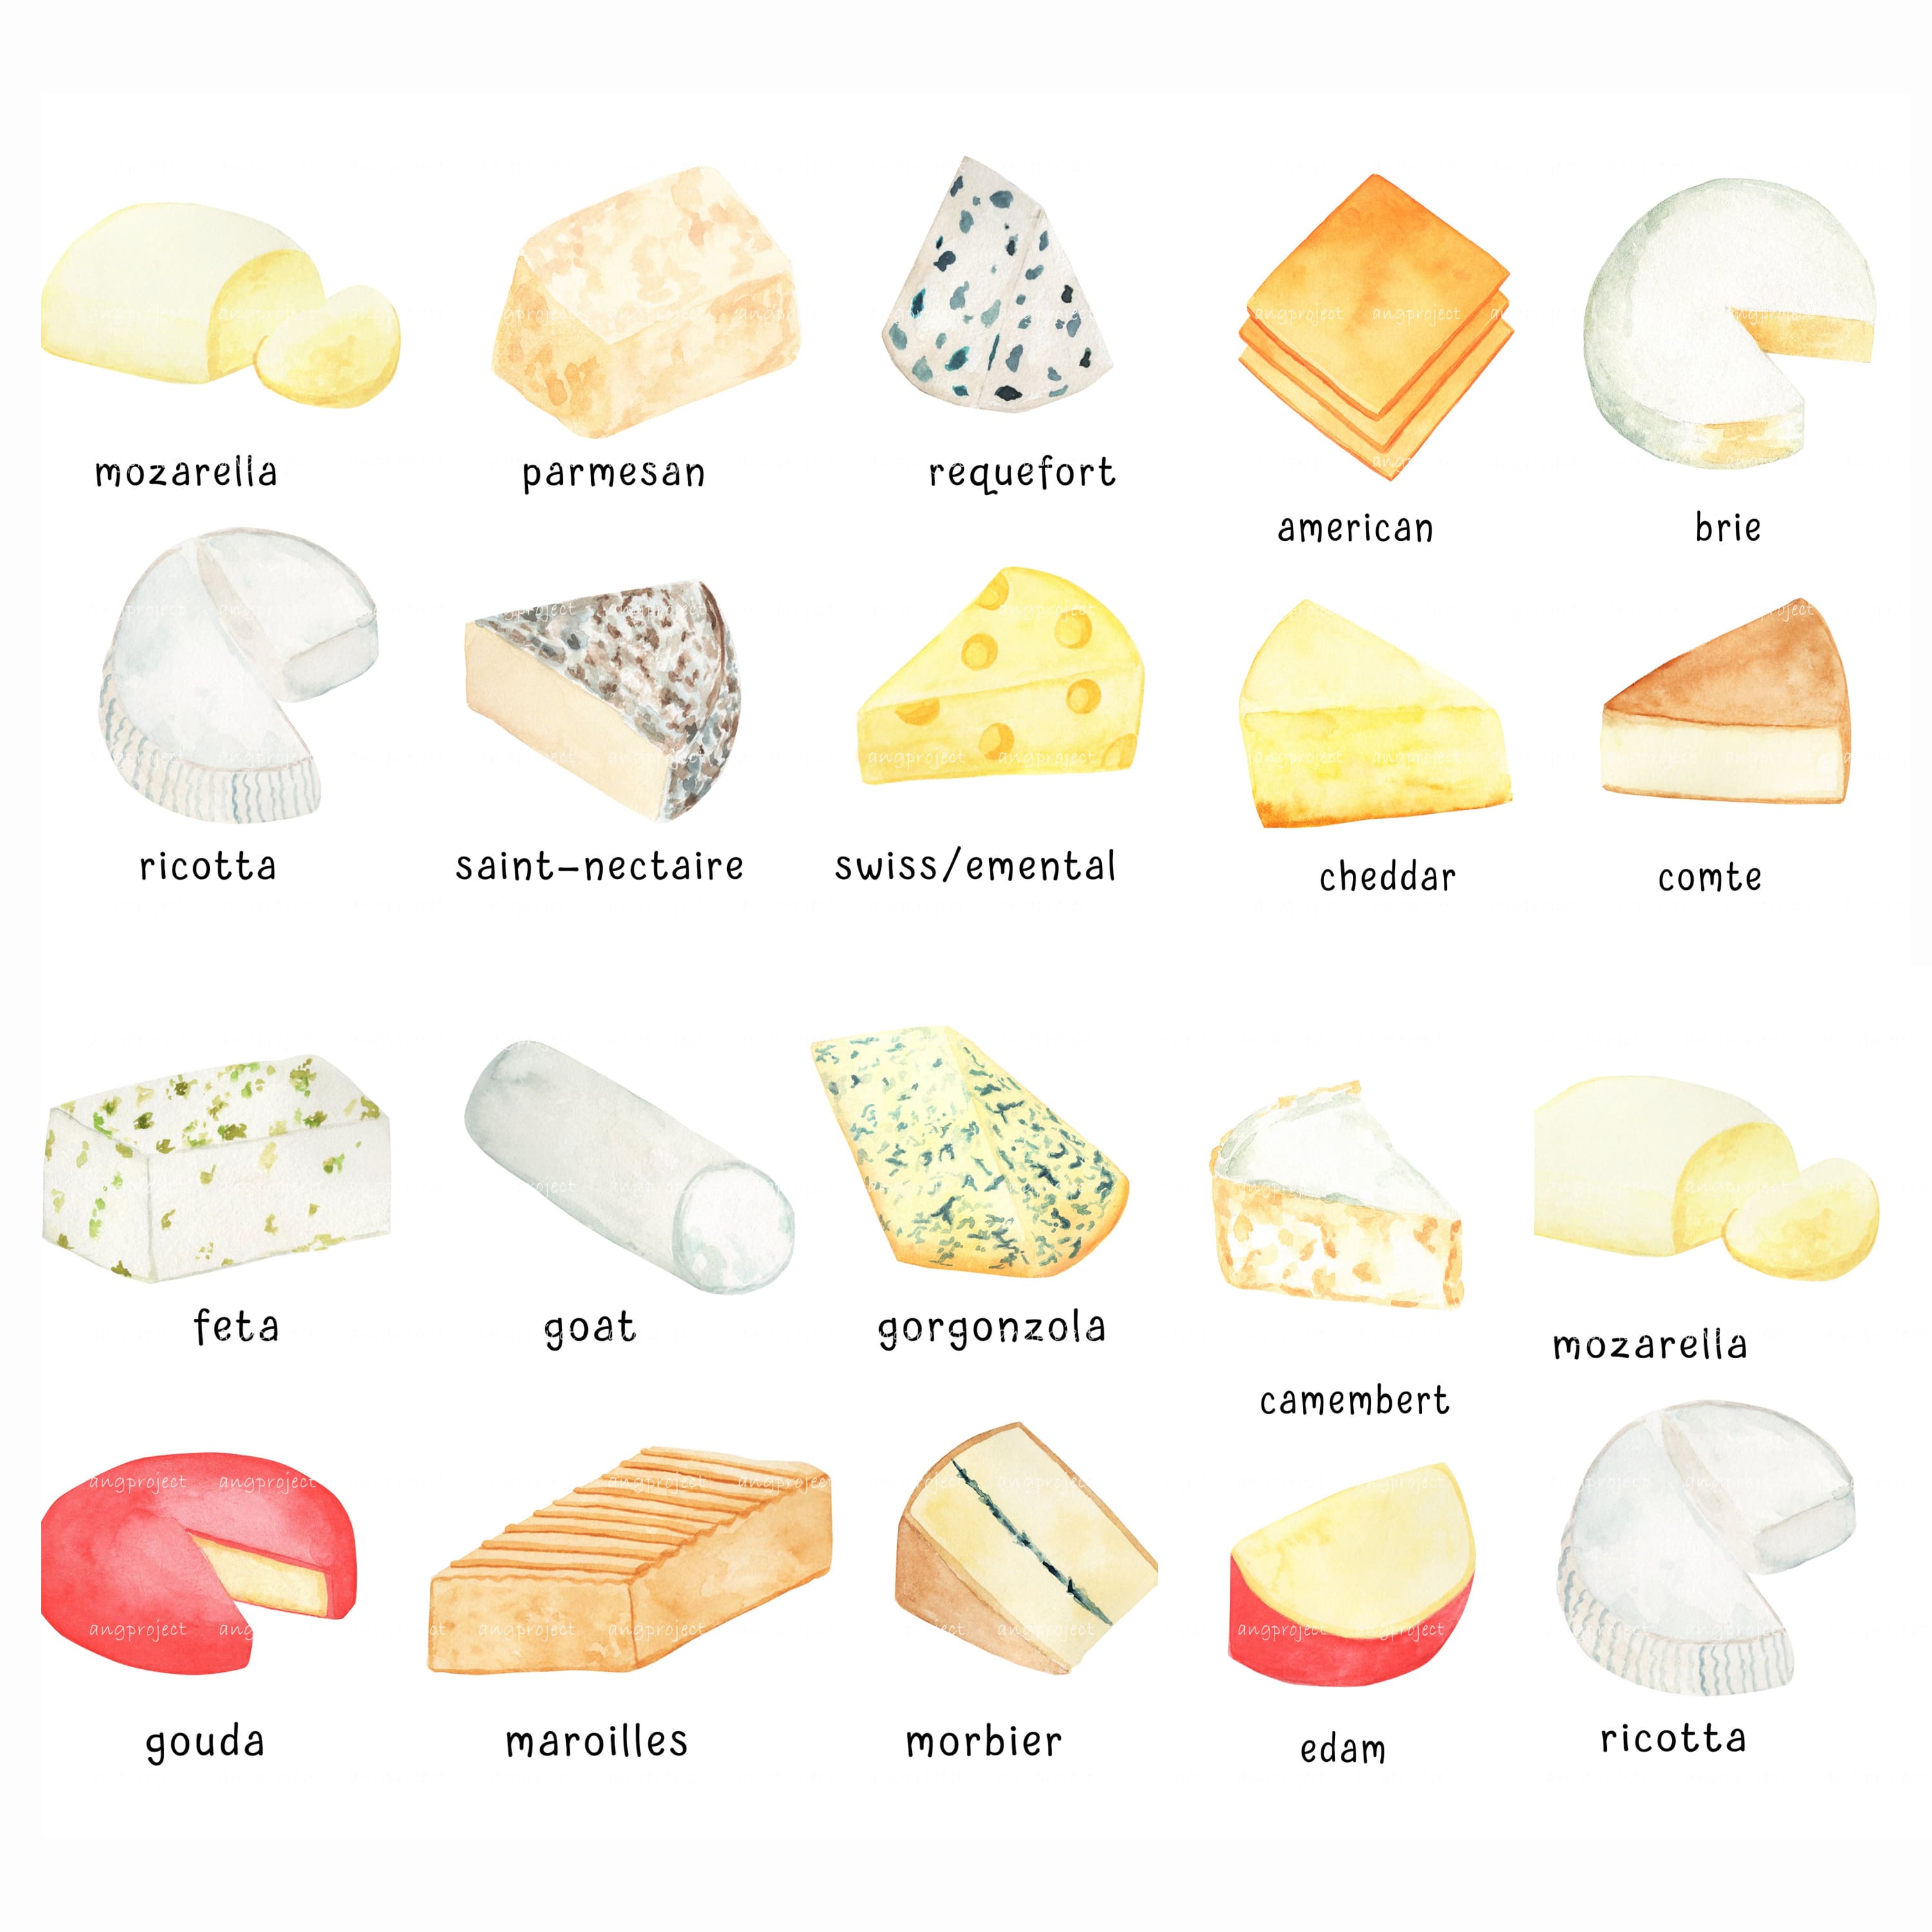 A set of watercolor images of exquisite cheese.